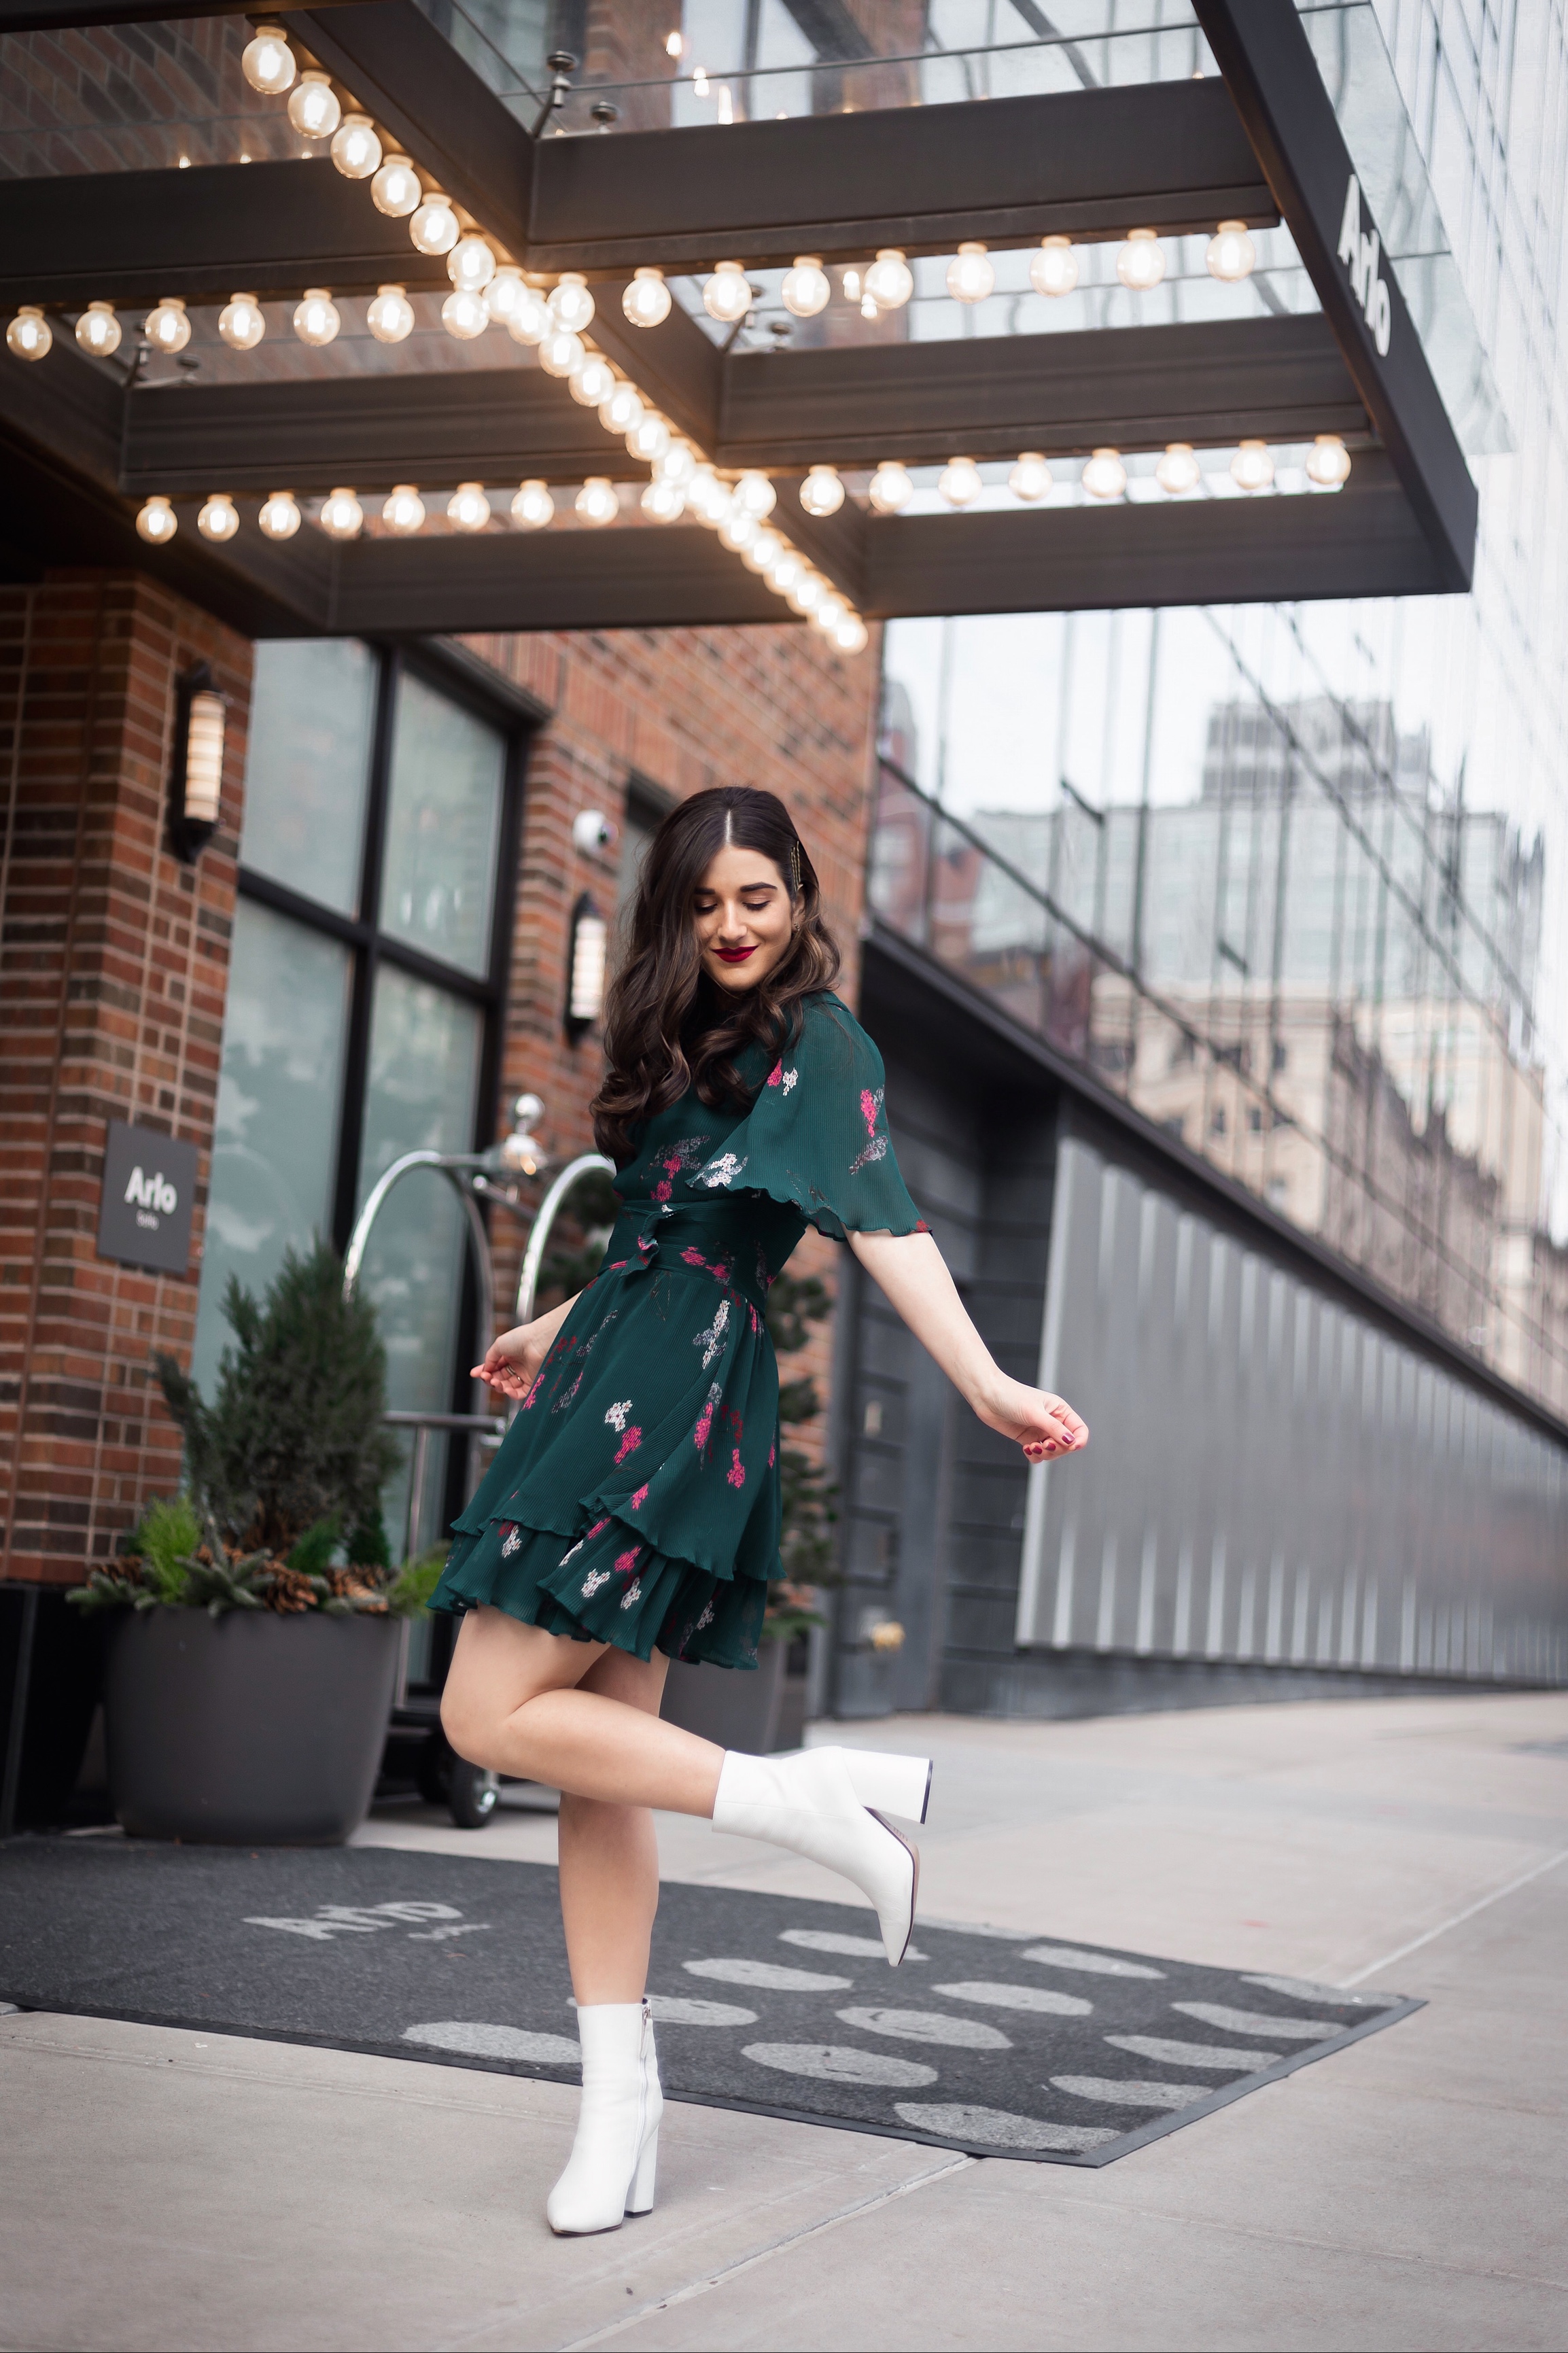 10 NYC Experiences Everyone Should Have Green Floral Dress White Booties Esther Santer Fashion Blog NYC  Street Style Blogger Outfit OOTD Trendy Shopping Girl What How To Wear Bobby Pins Hairstyle Fall Look Butterfly Sleeves Keepsake Label Arlo Soho.JPG